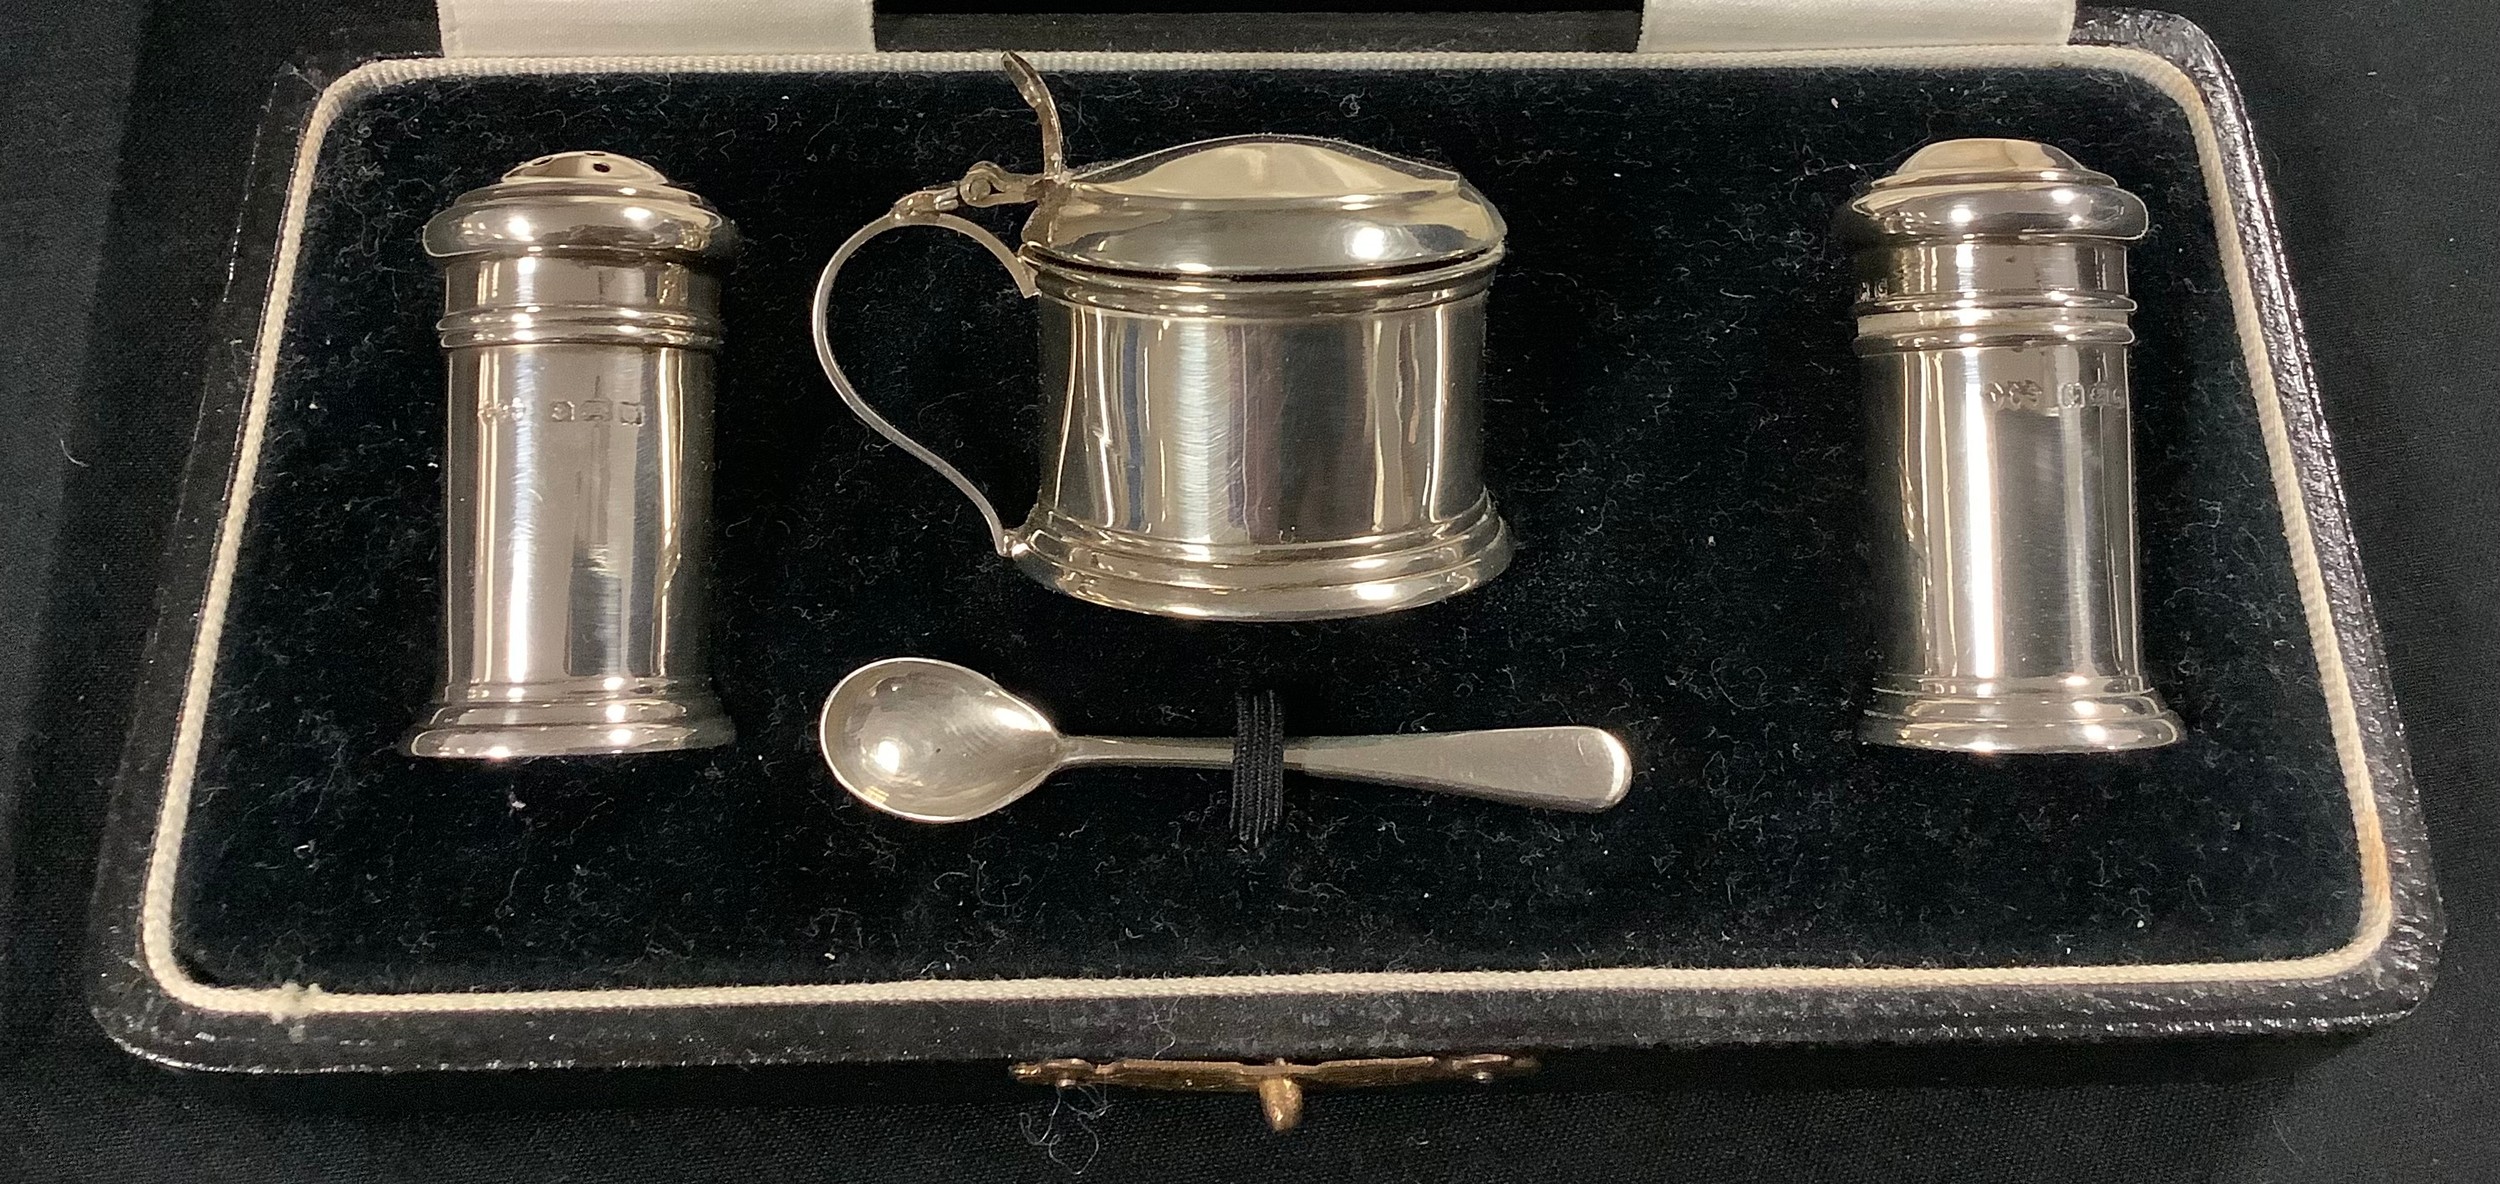 A George V silver three piece cruet set, salt pepper and mustard pot, with silver condiment spoon,